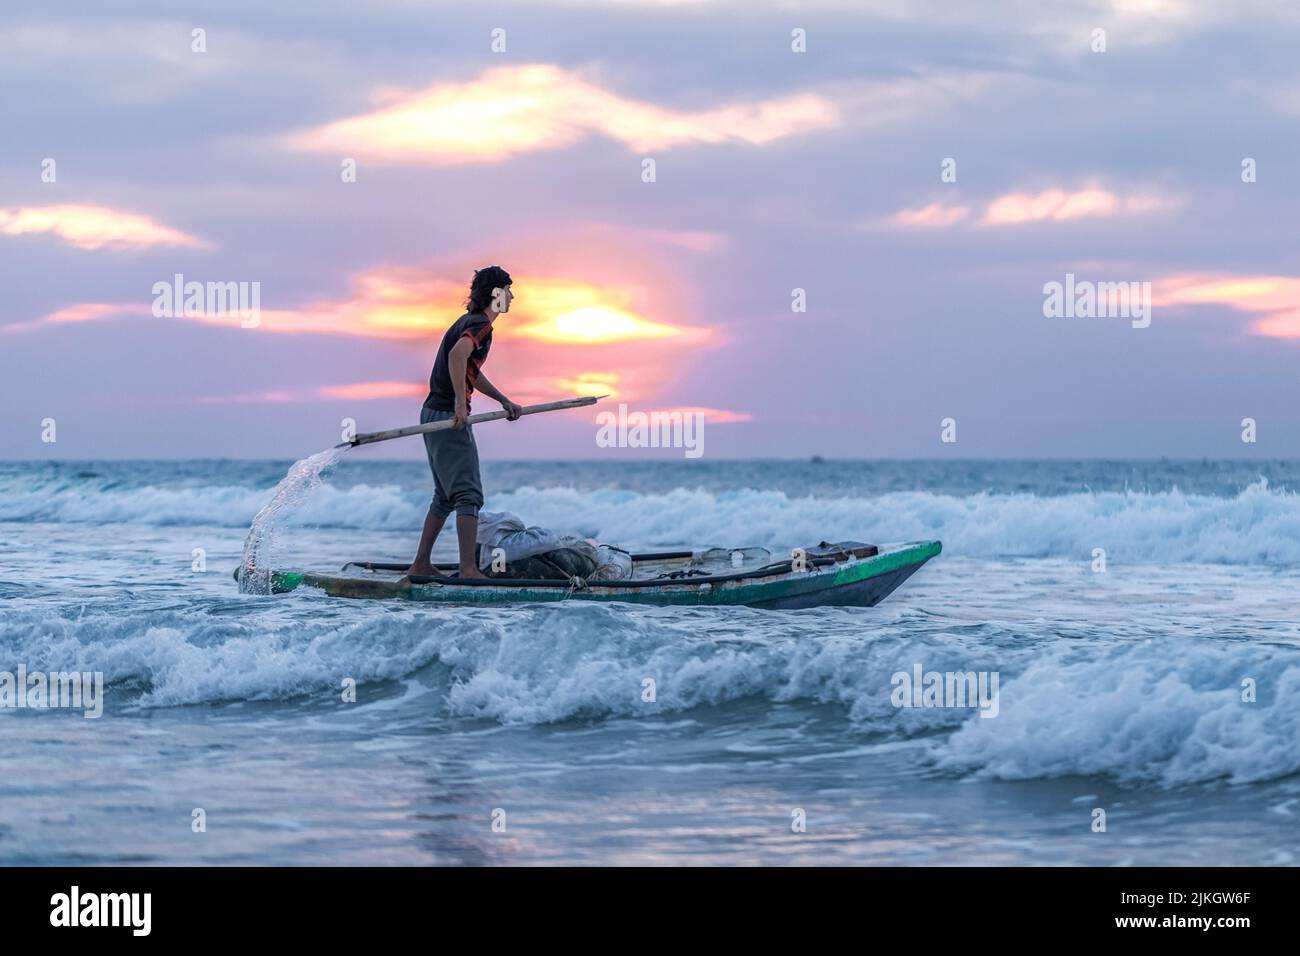 A male paddling on his boat on the sea to catch fish as his livelihood Stock Photo